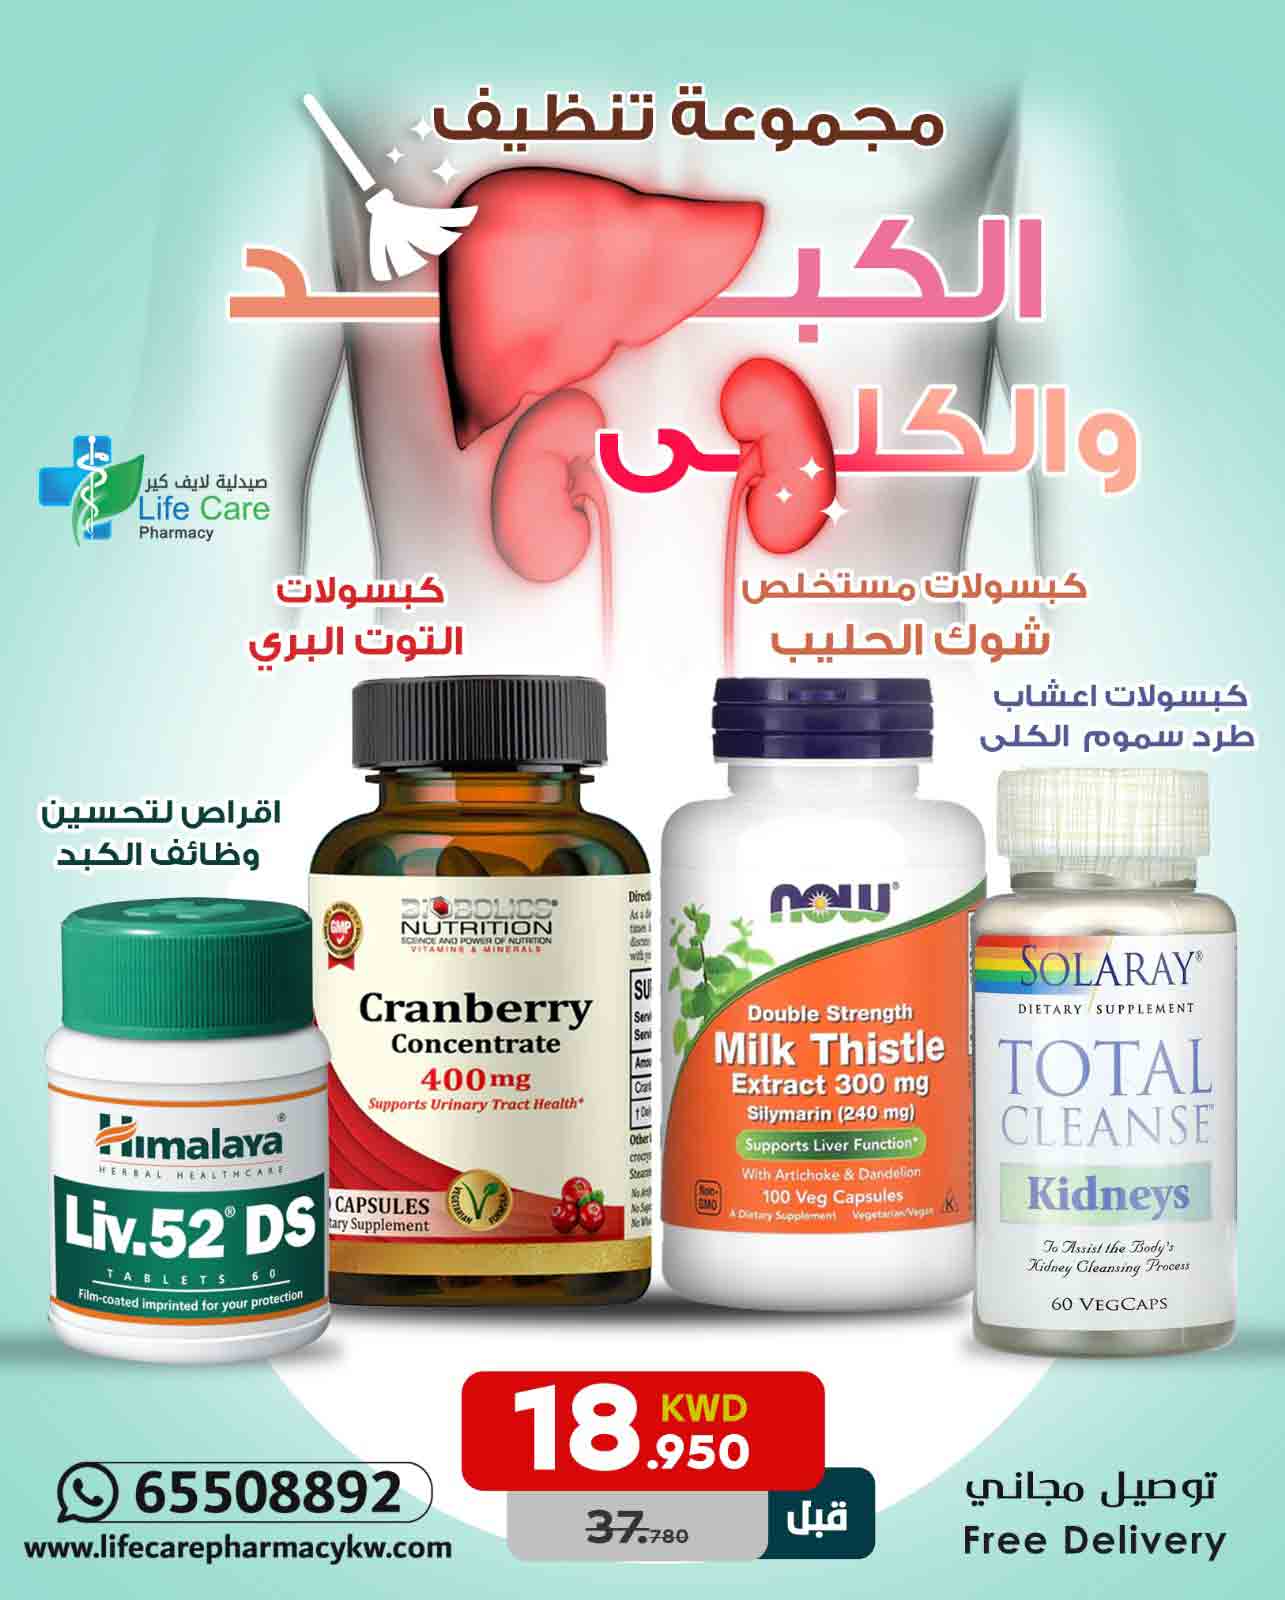 PACKAGE 279 - Life Care Pharmacy